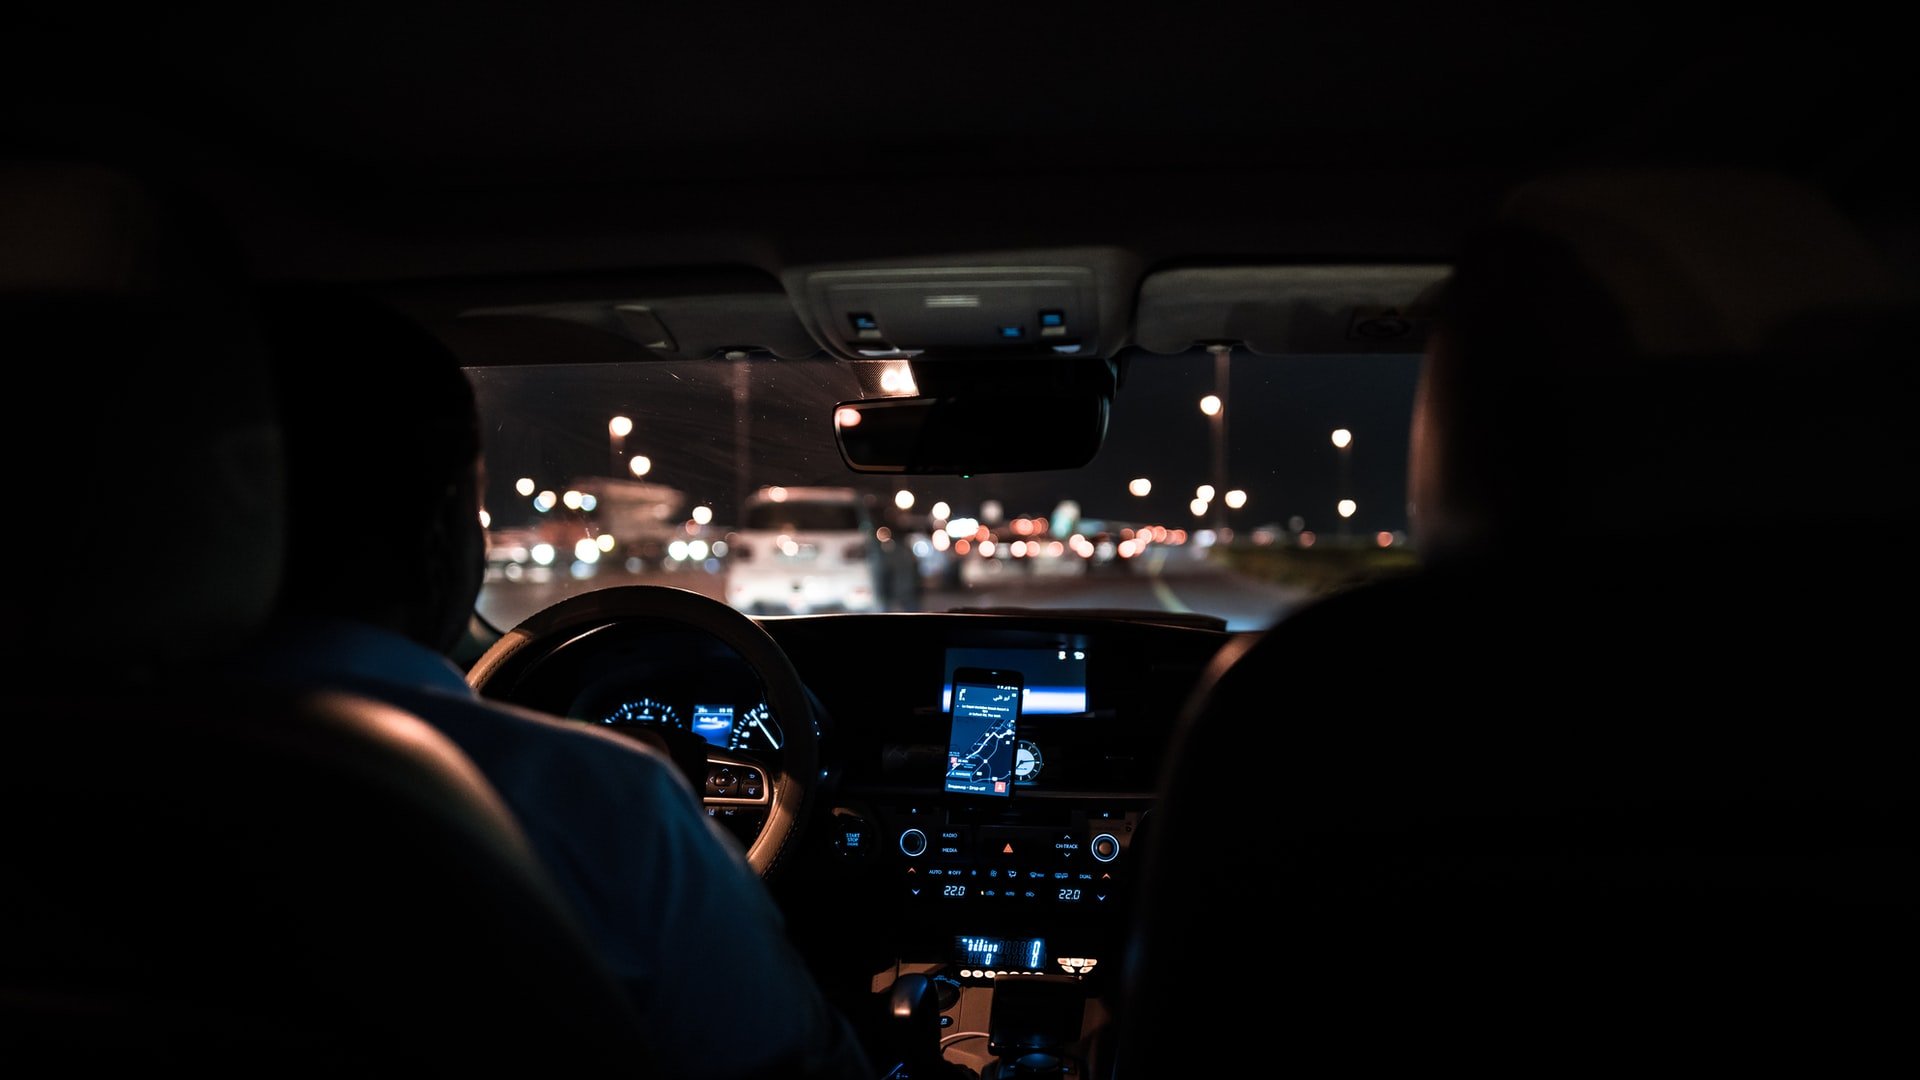 Another user shared if his passenger did something similar, he would ask him to apologize | Source: Unsplash